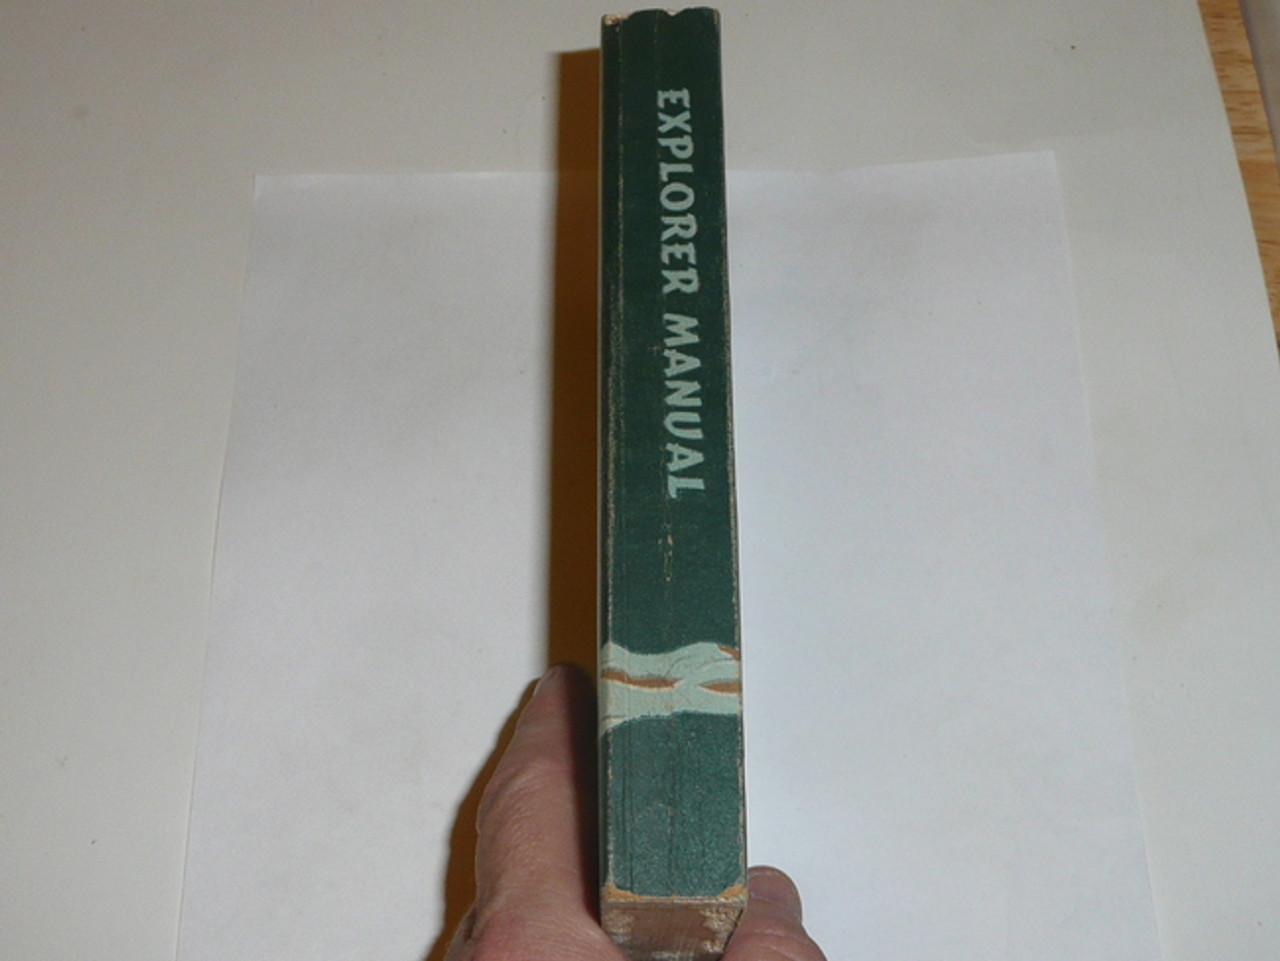 1956 Explorer Scout Manual, First Edition, 1956 Printing 18307